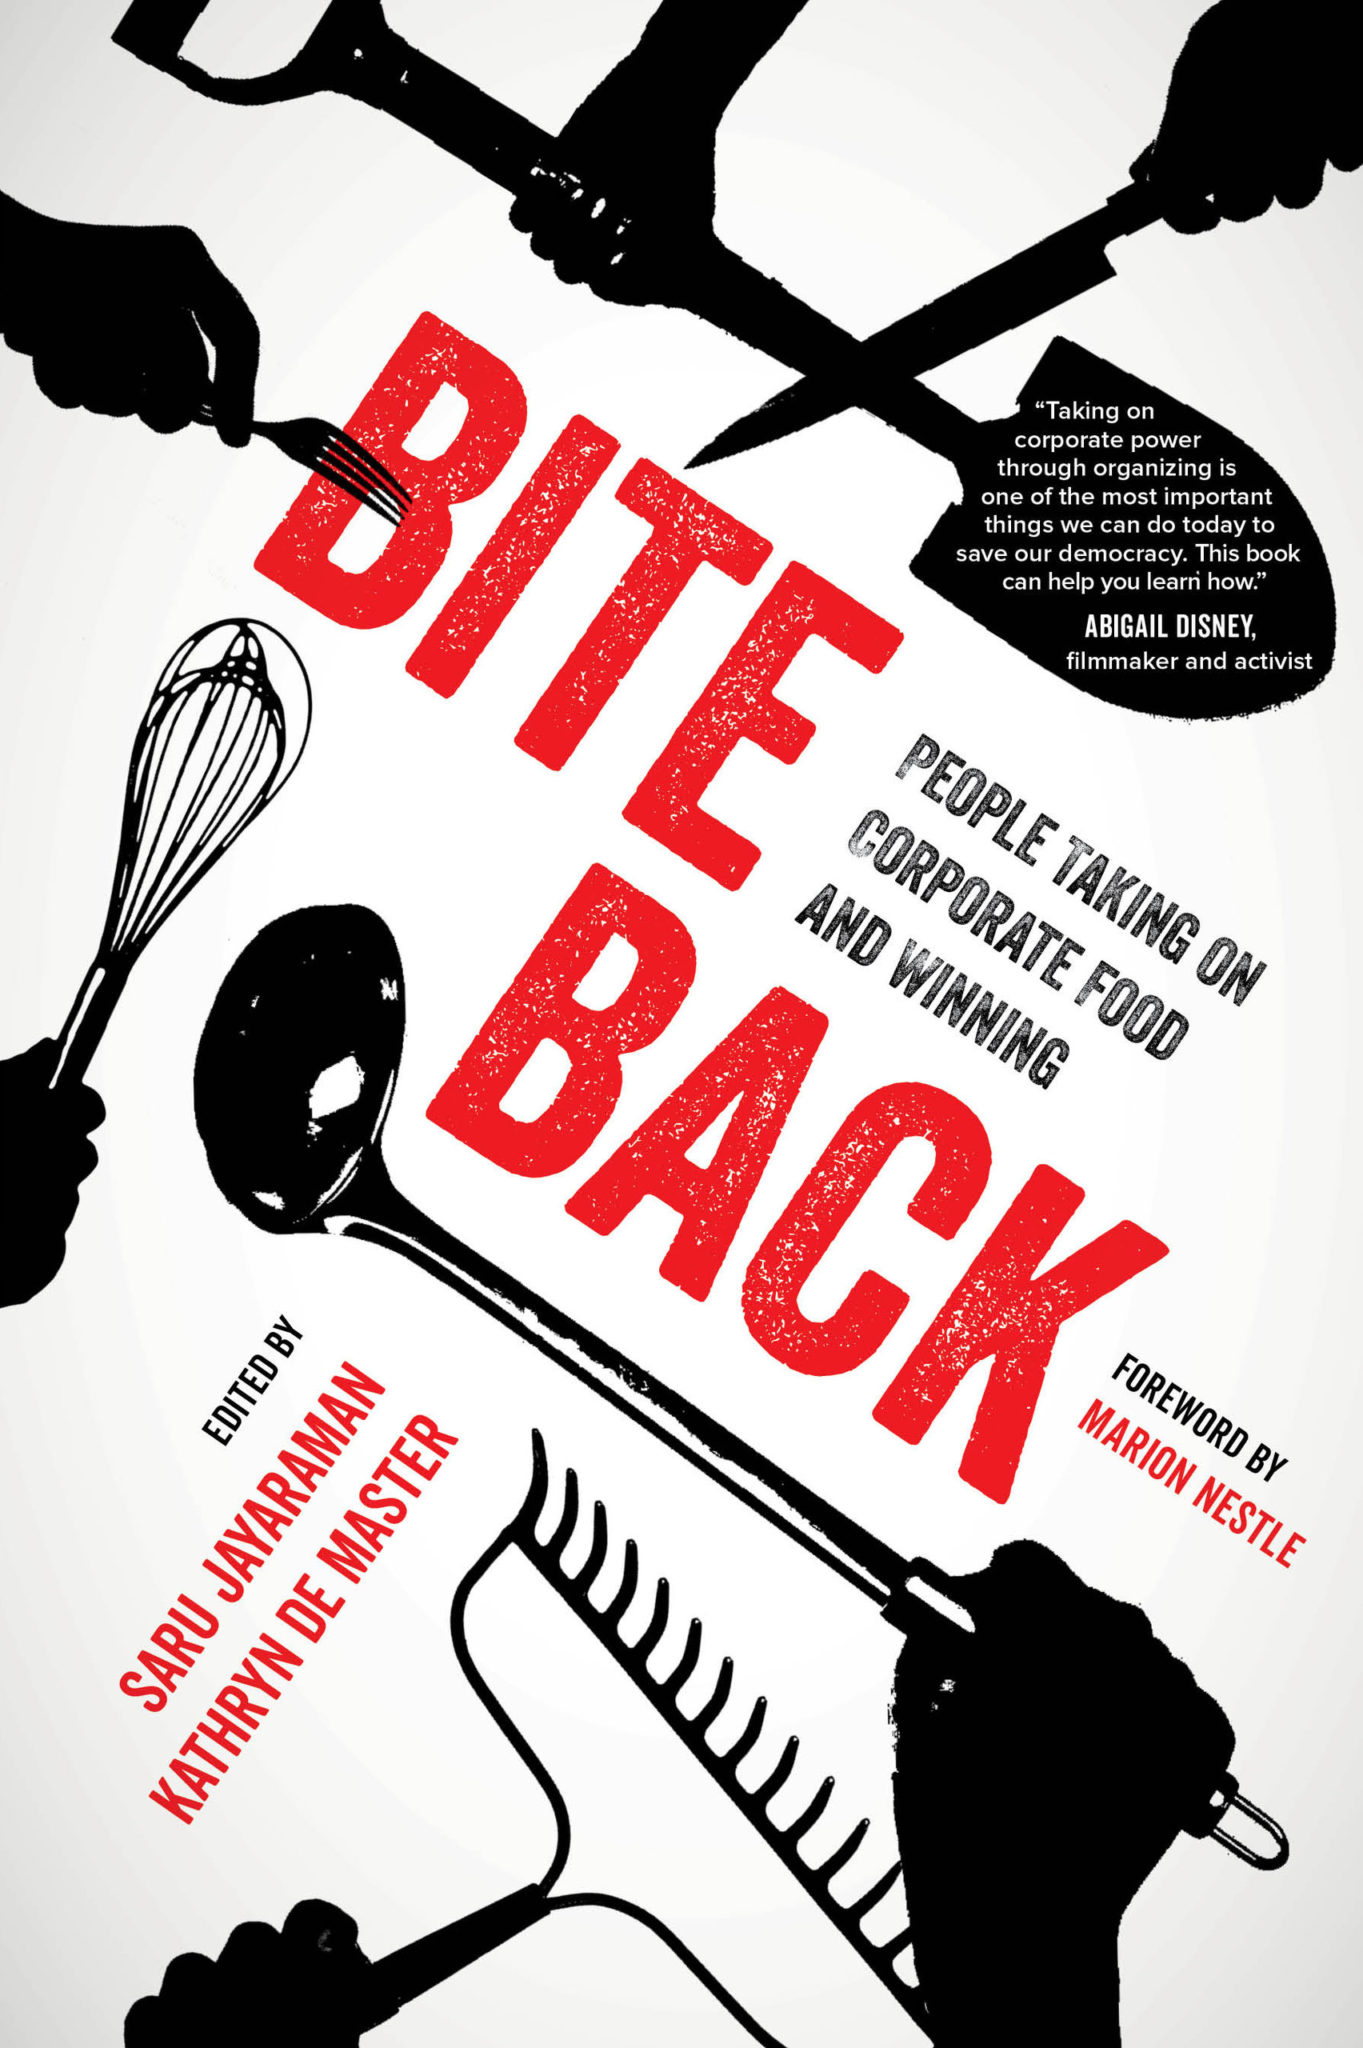 Cover of the book Bite Back.